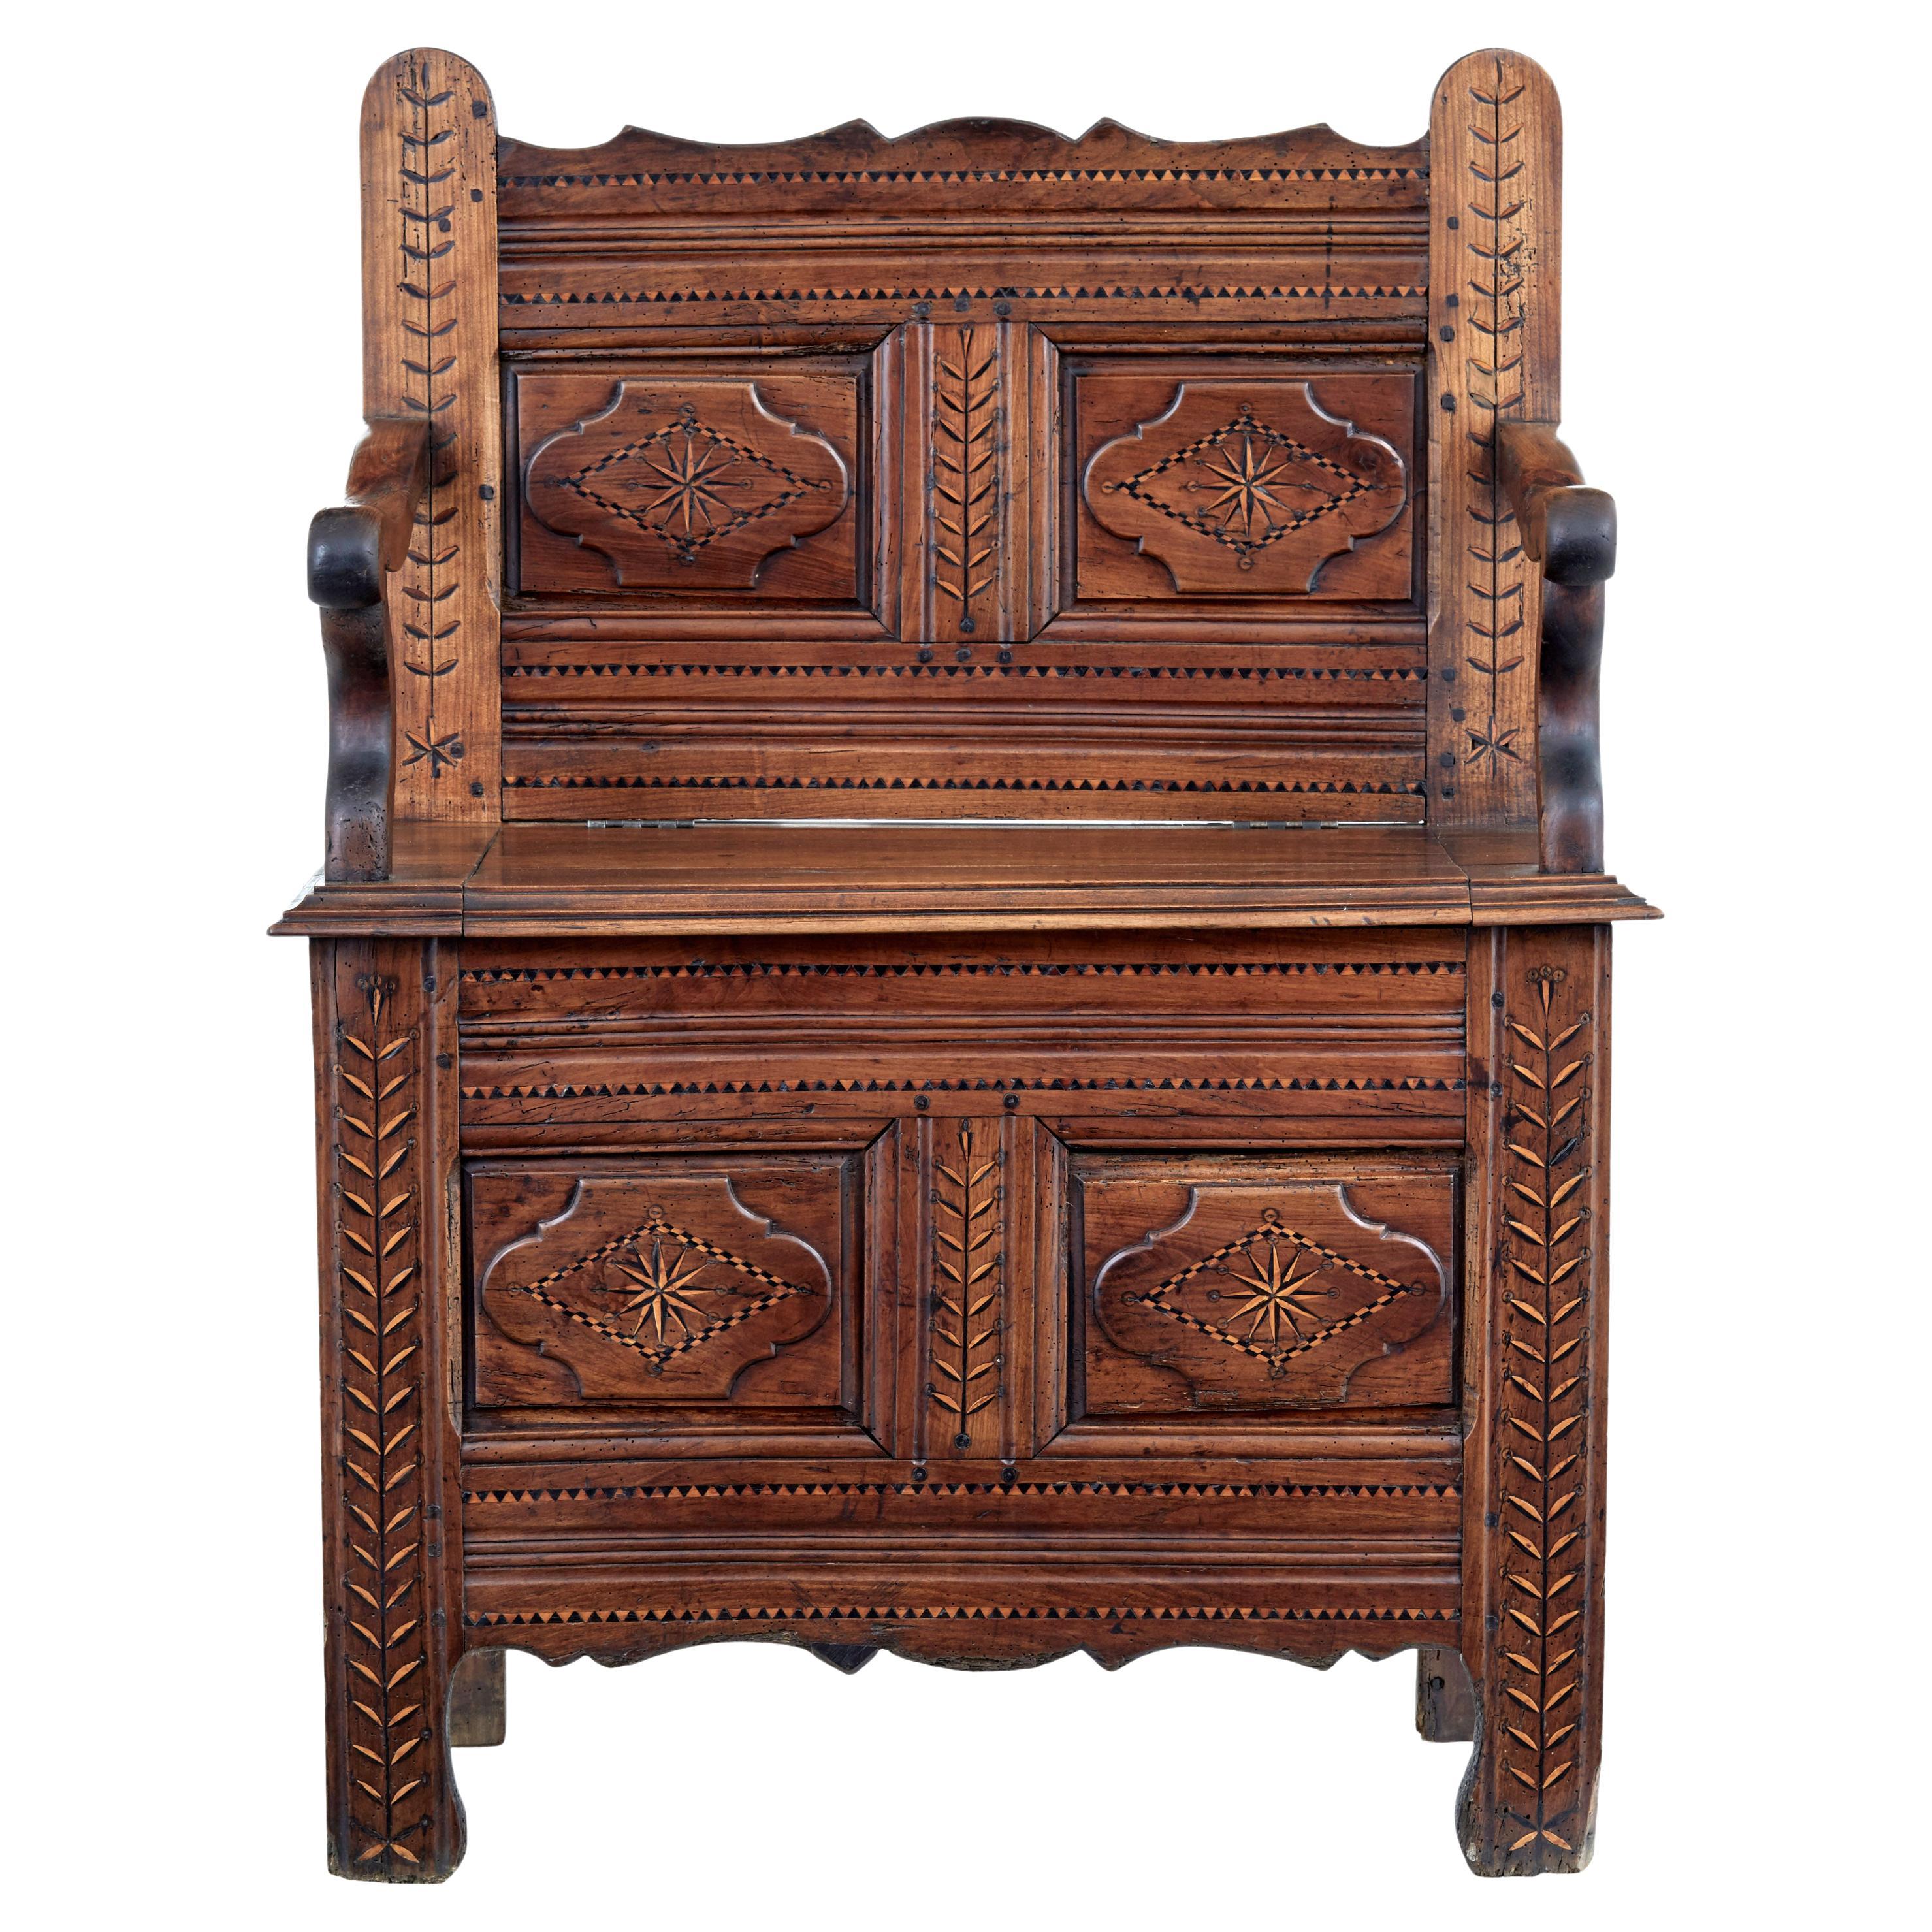 French 18th Century Small Inlaid Chestnut Settle